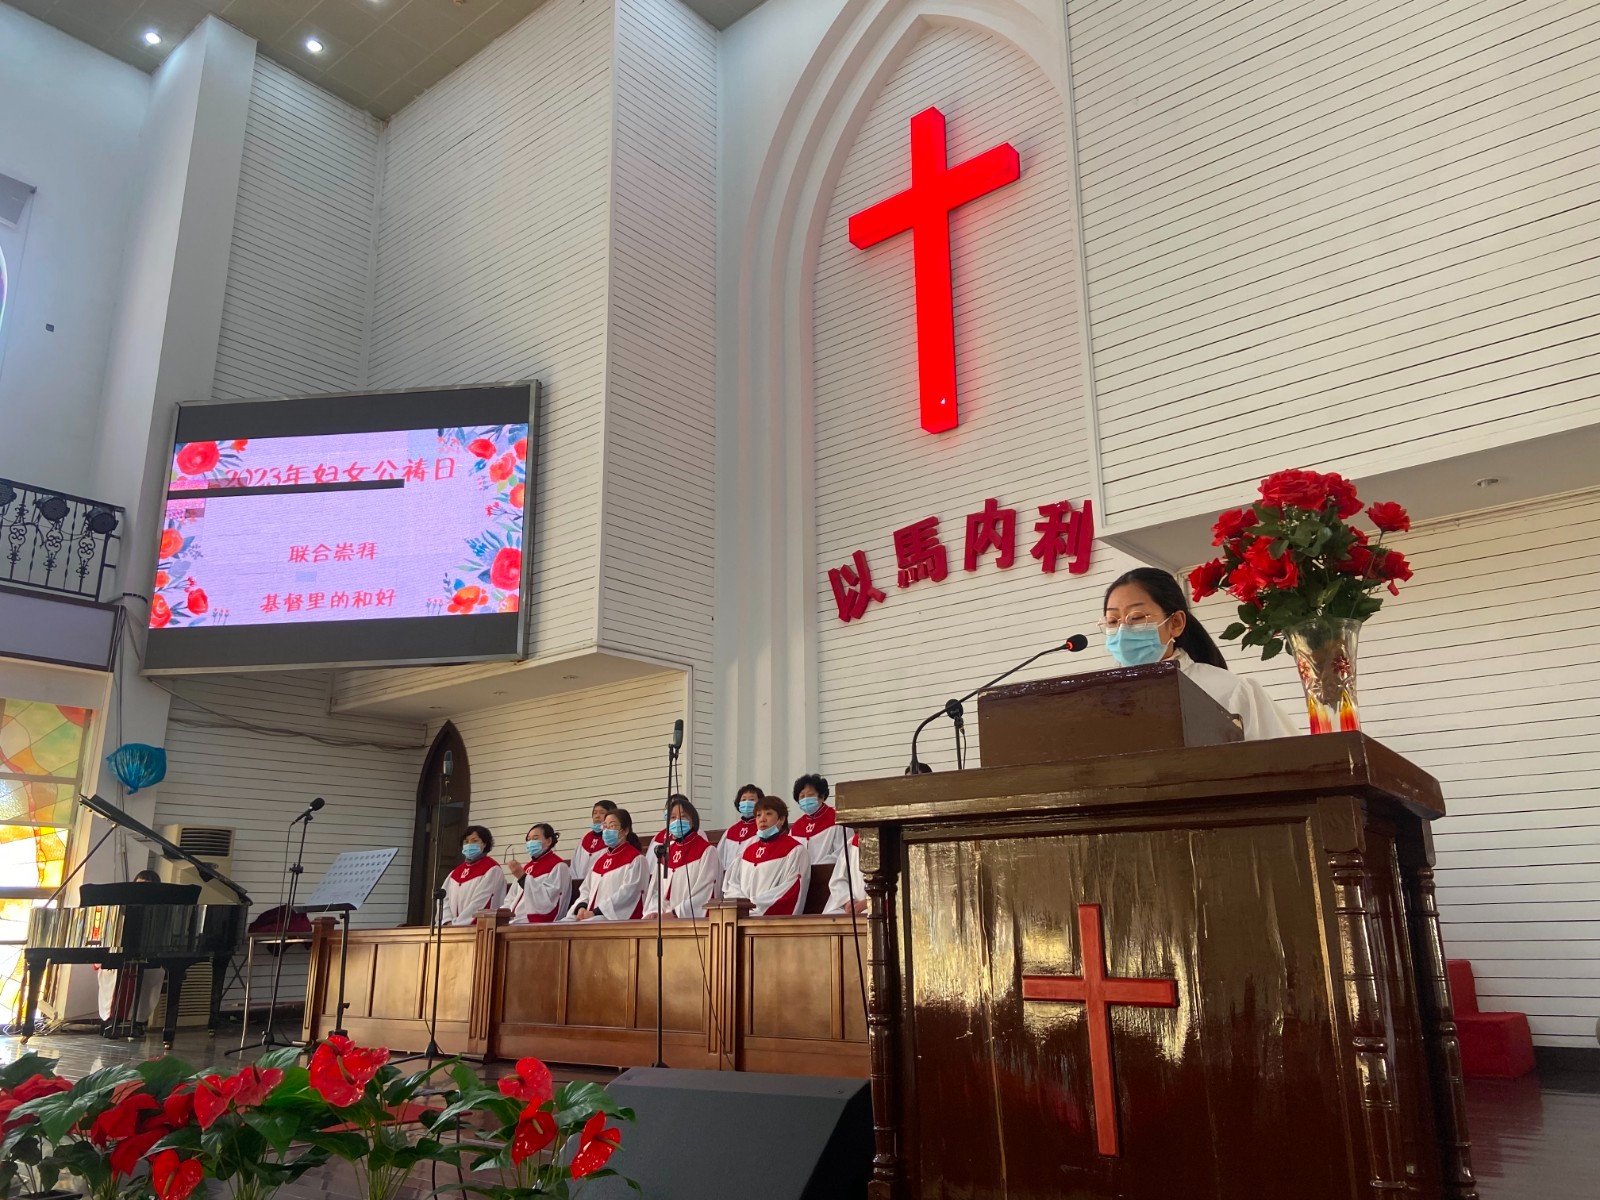 Pastor Zhang Xingxing talked about the history of the World Day of Prayer at a service on March 3, 2023, in Changzhou Church, Jiangsu Province.